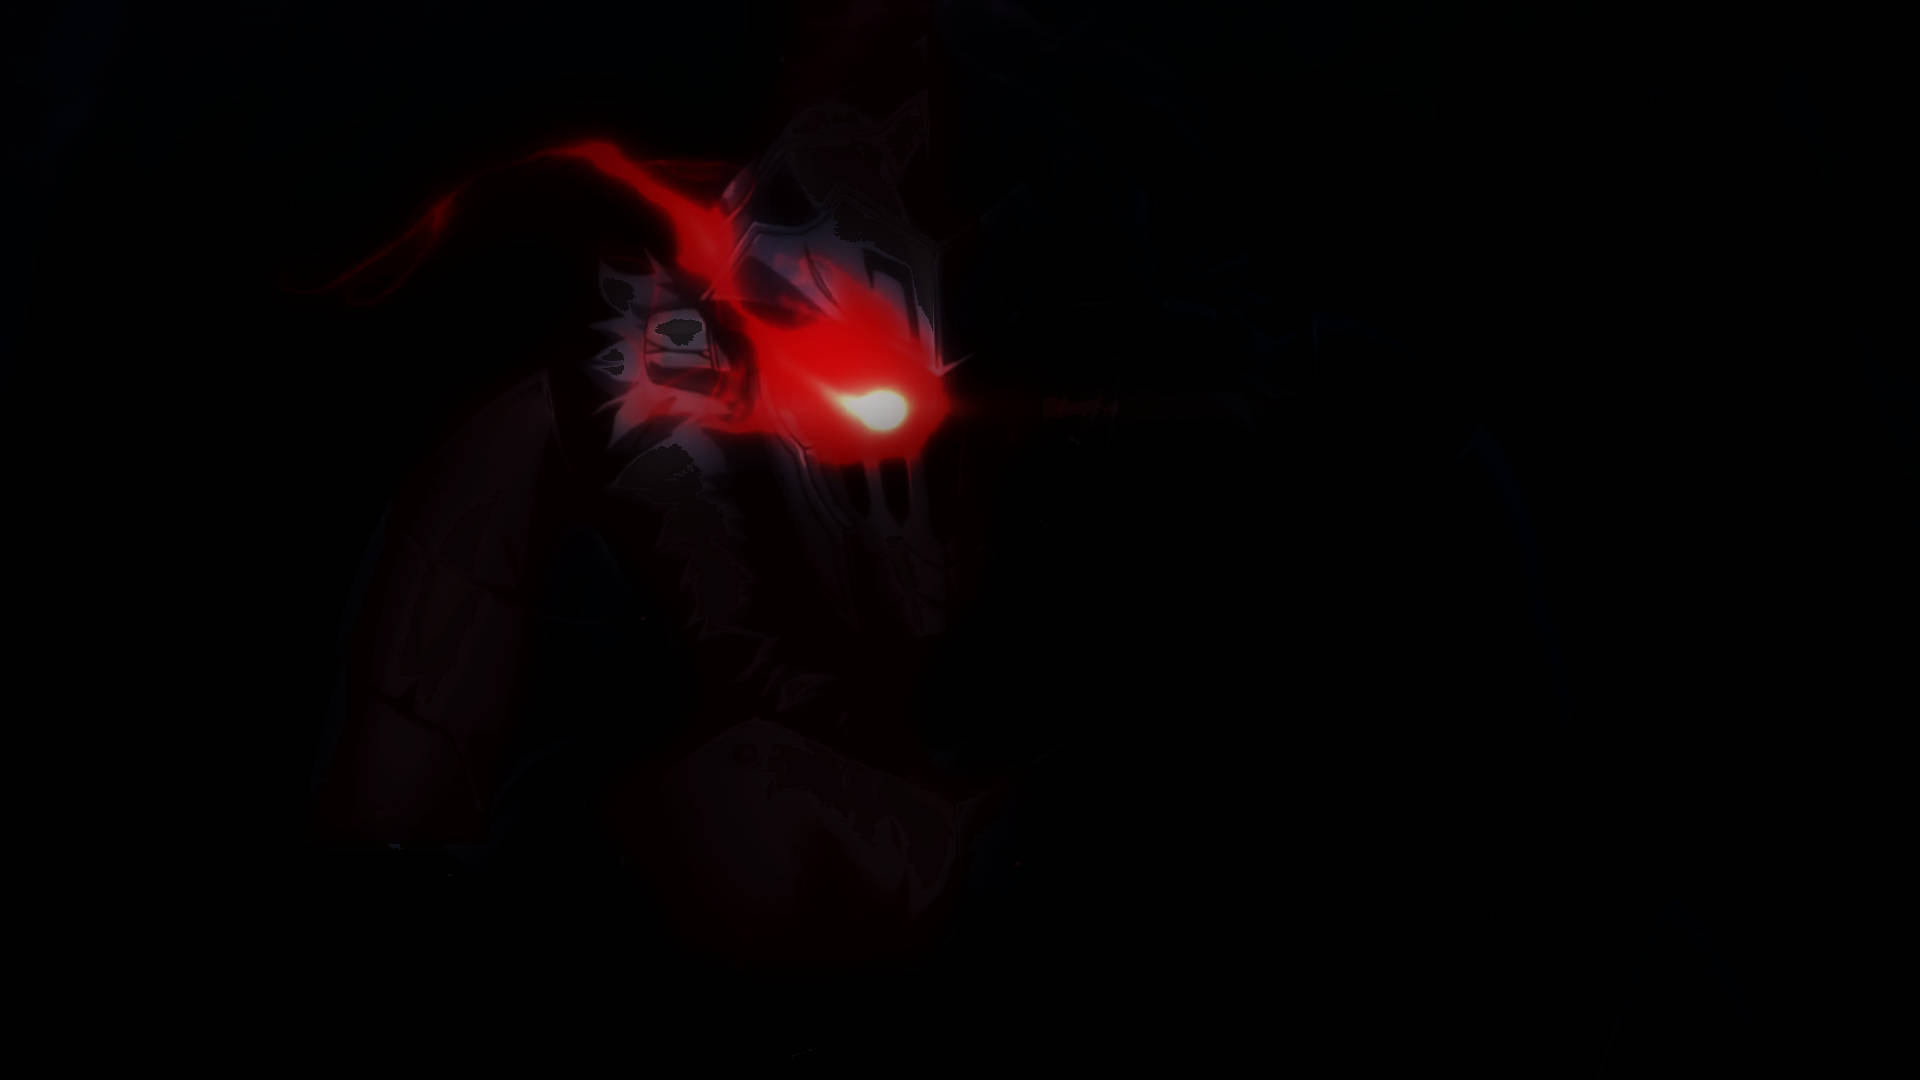 Goblin Slayer 1920X1080 Wallpaper and Background Image